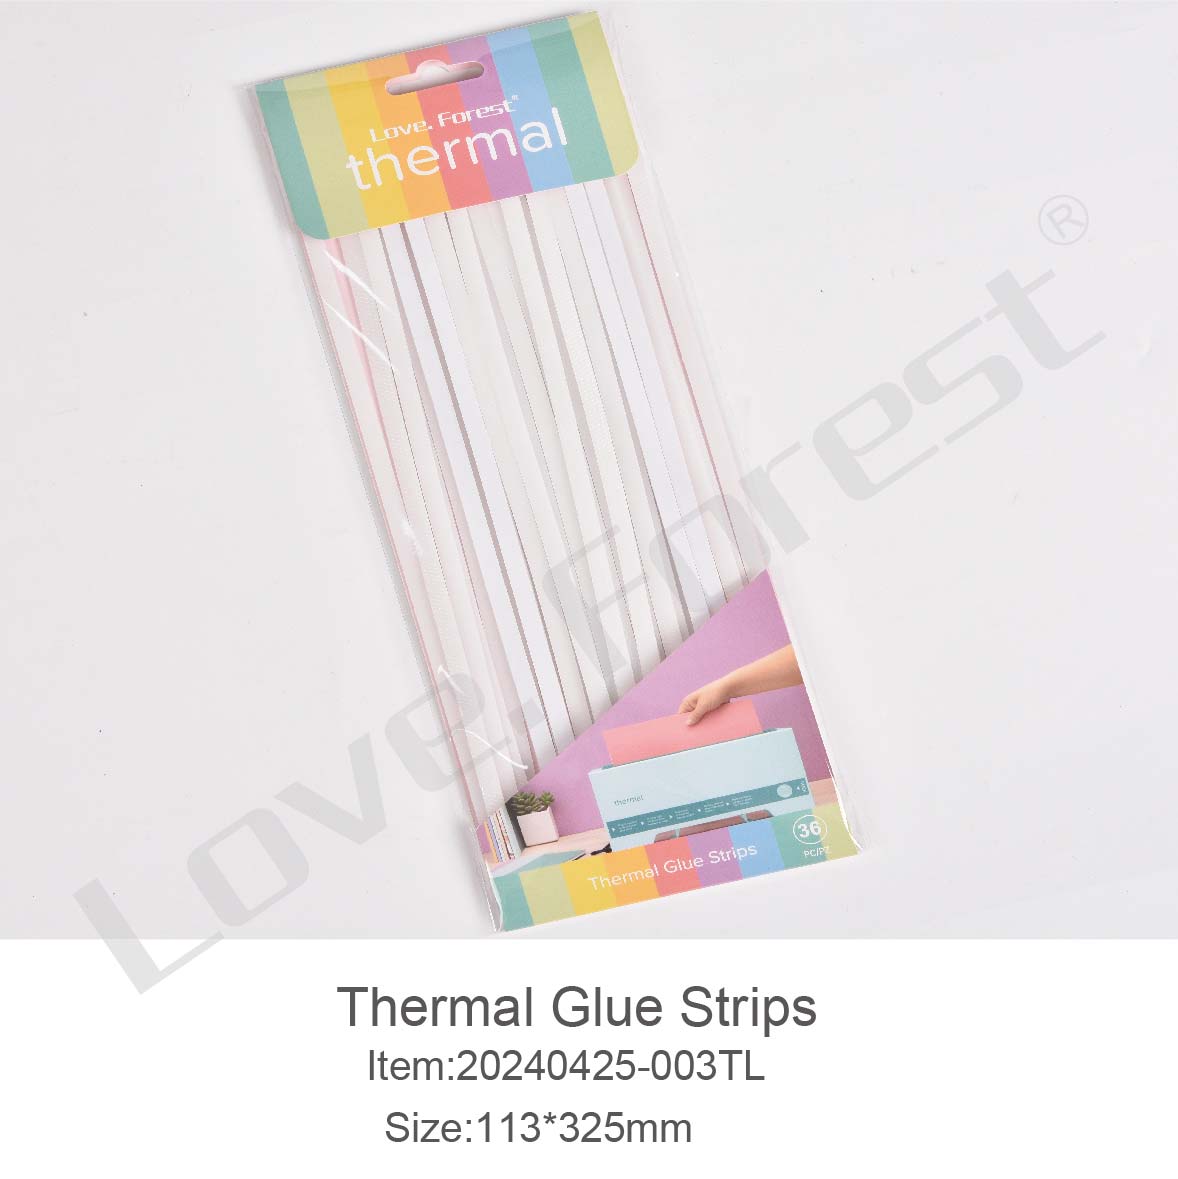 Thermal Glue Strips